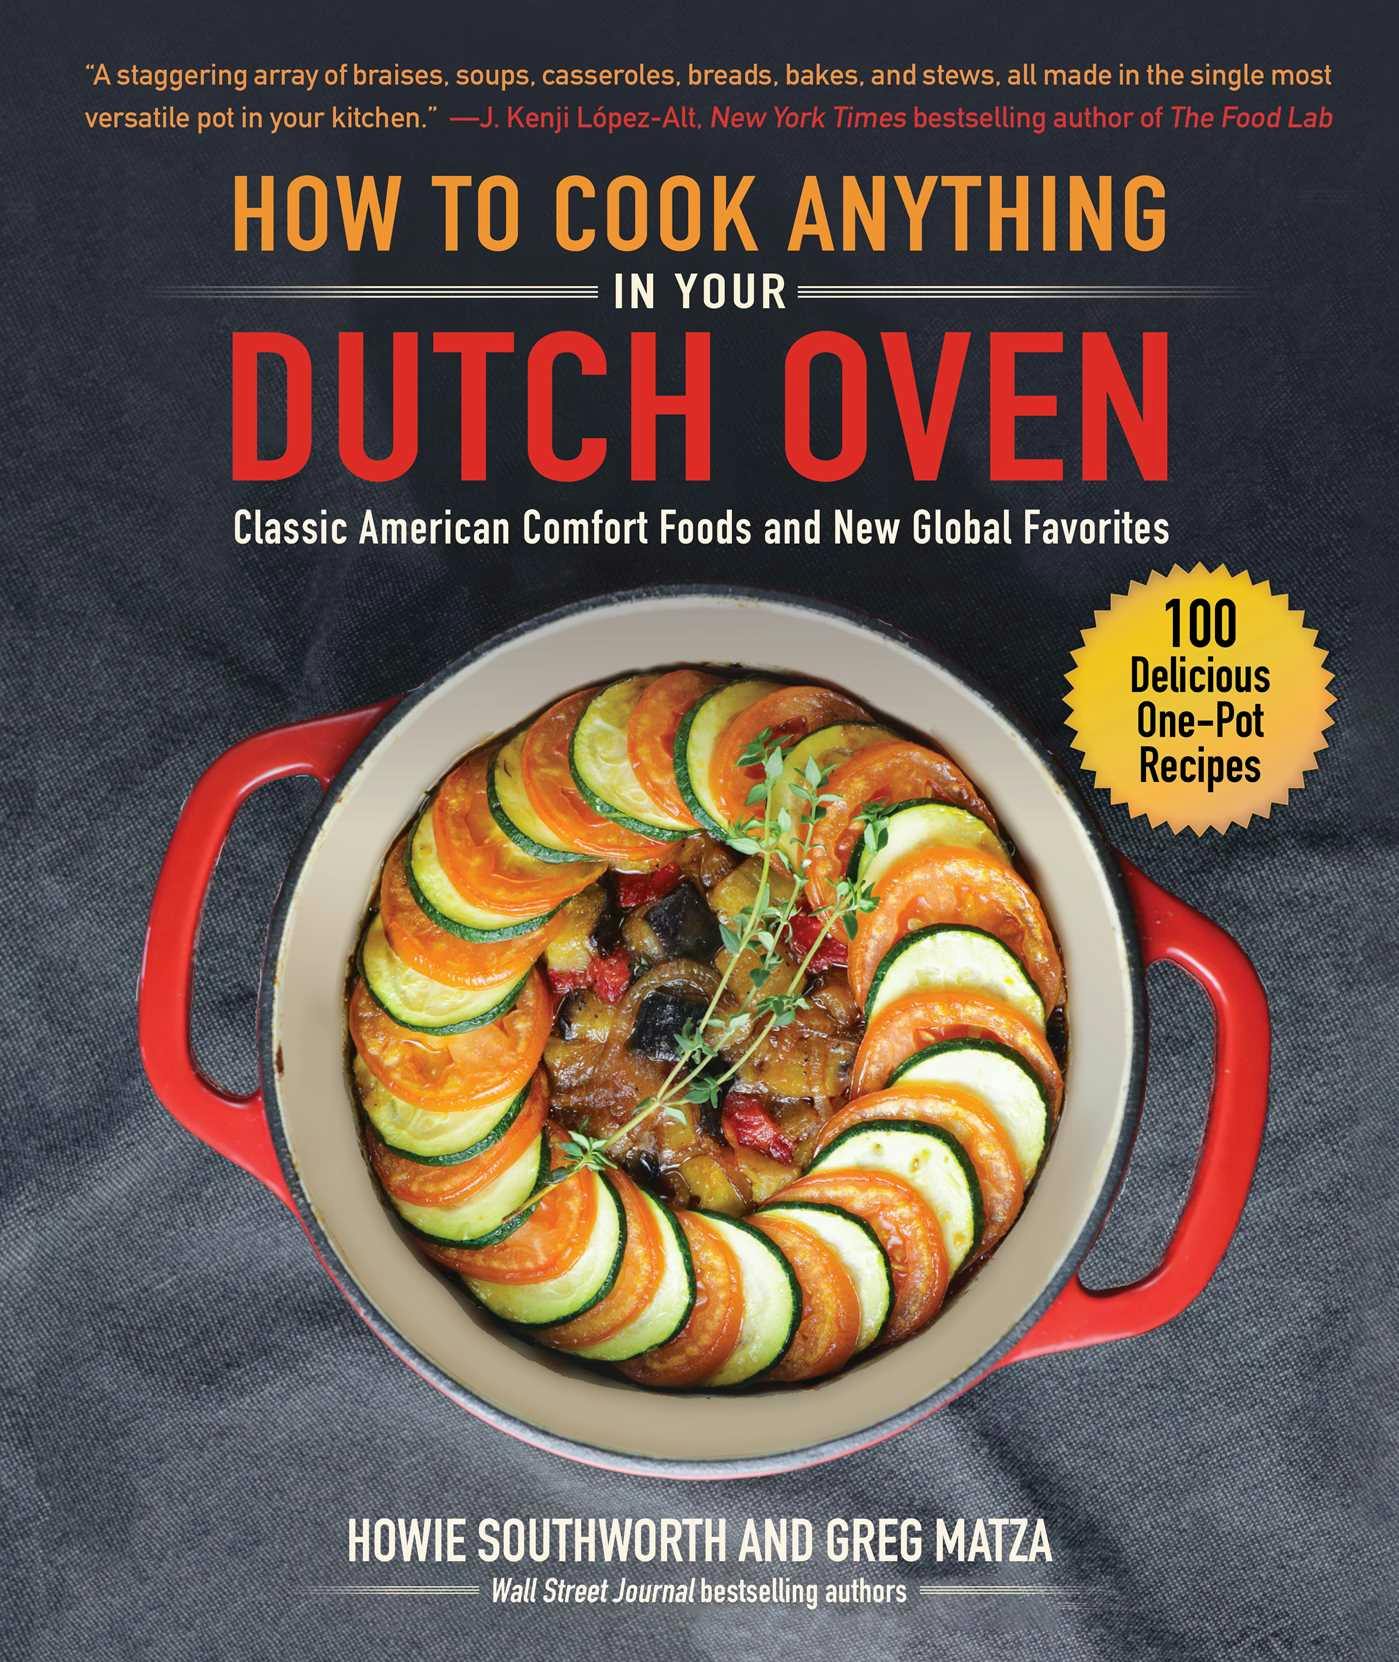 How to Cook Anything in Your Dutch Oven: Classic American Comfort Foods and New Global Favorites - Greg Matza, Howie Southworth